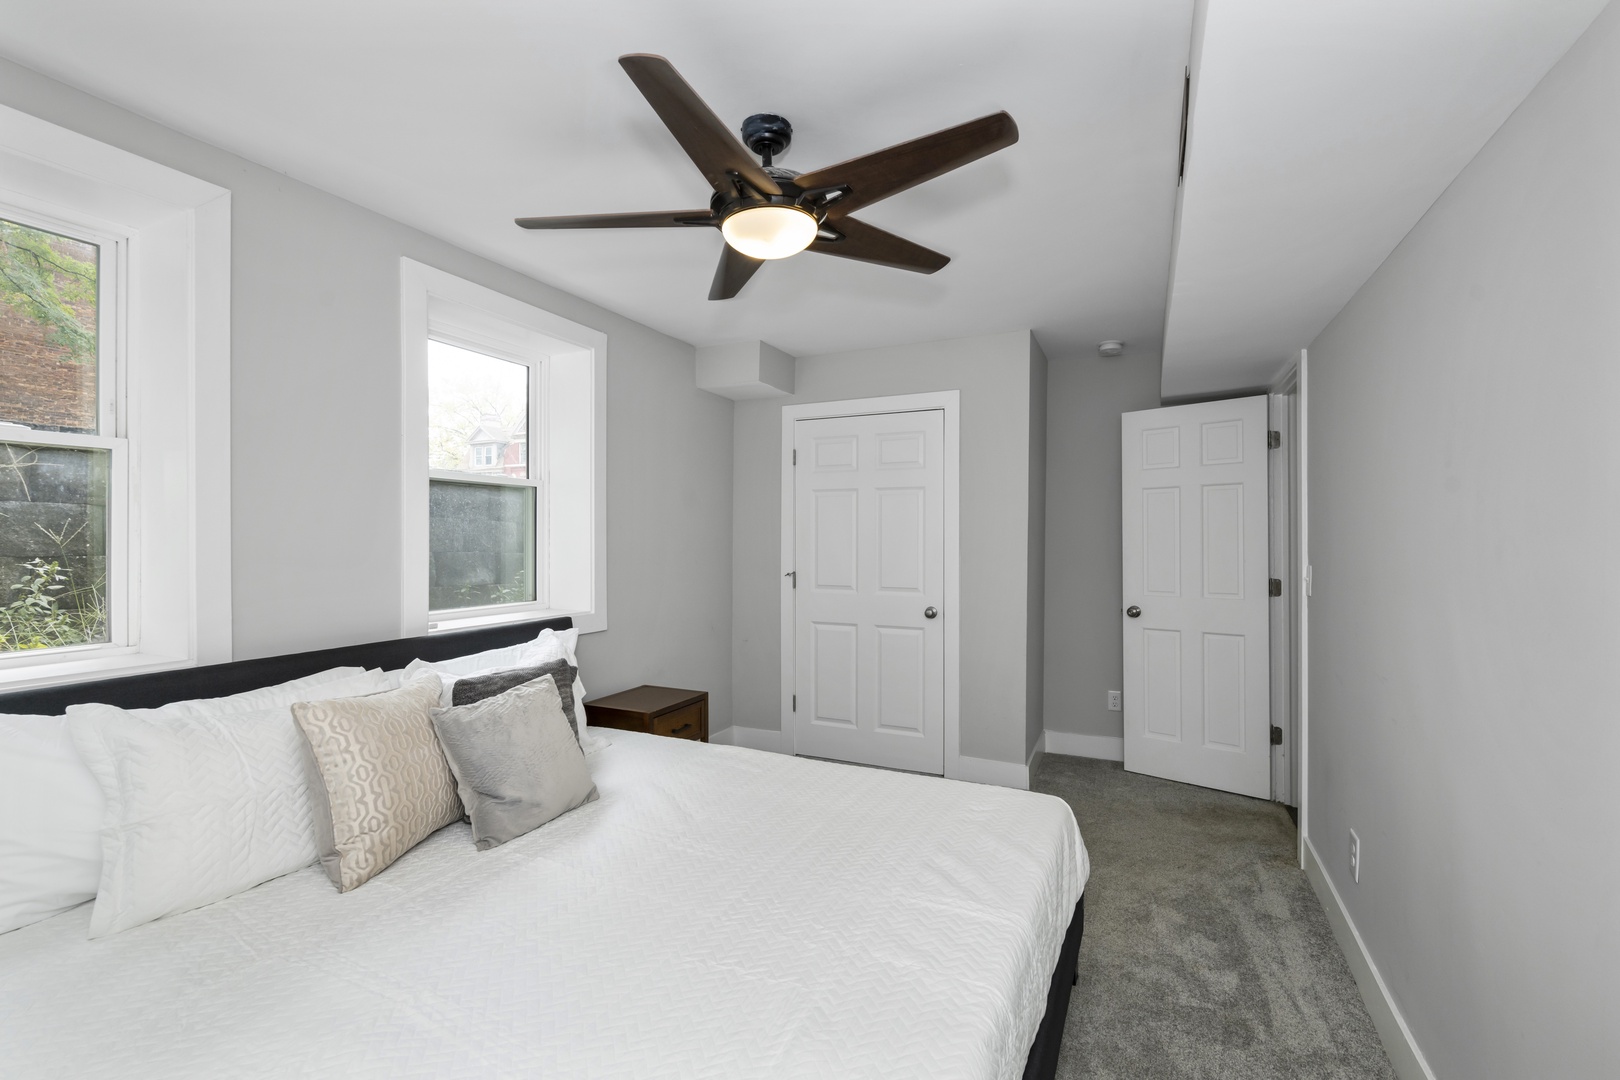 The lower-level king bedroom offers a ceiling fan & lots of privacy